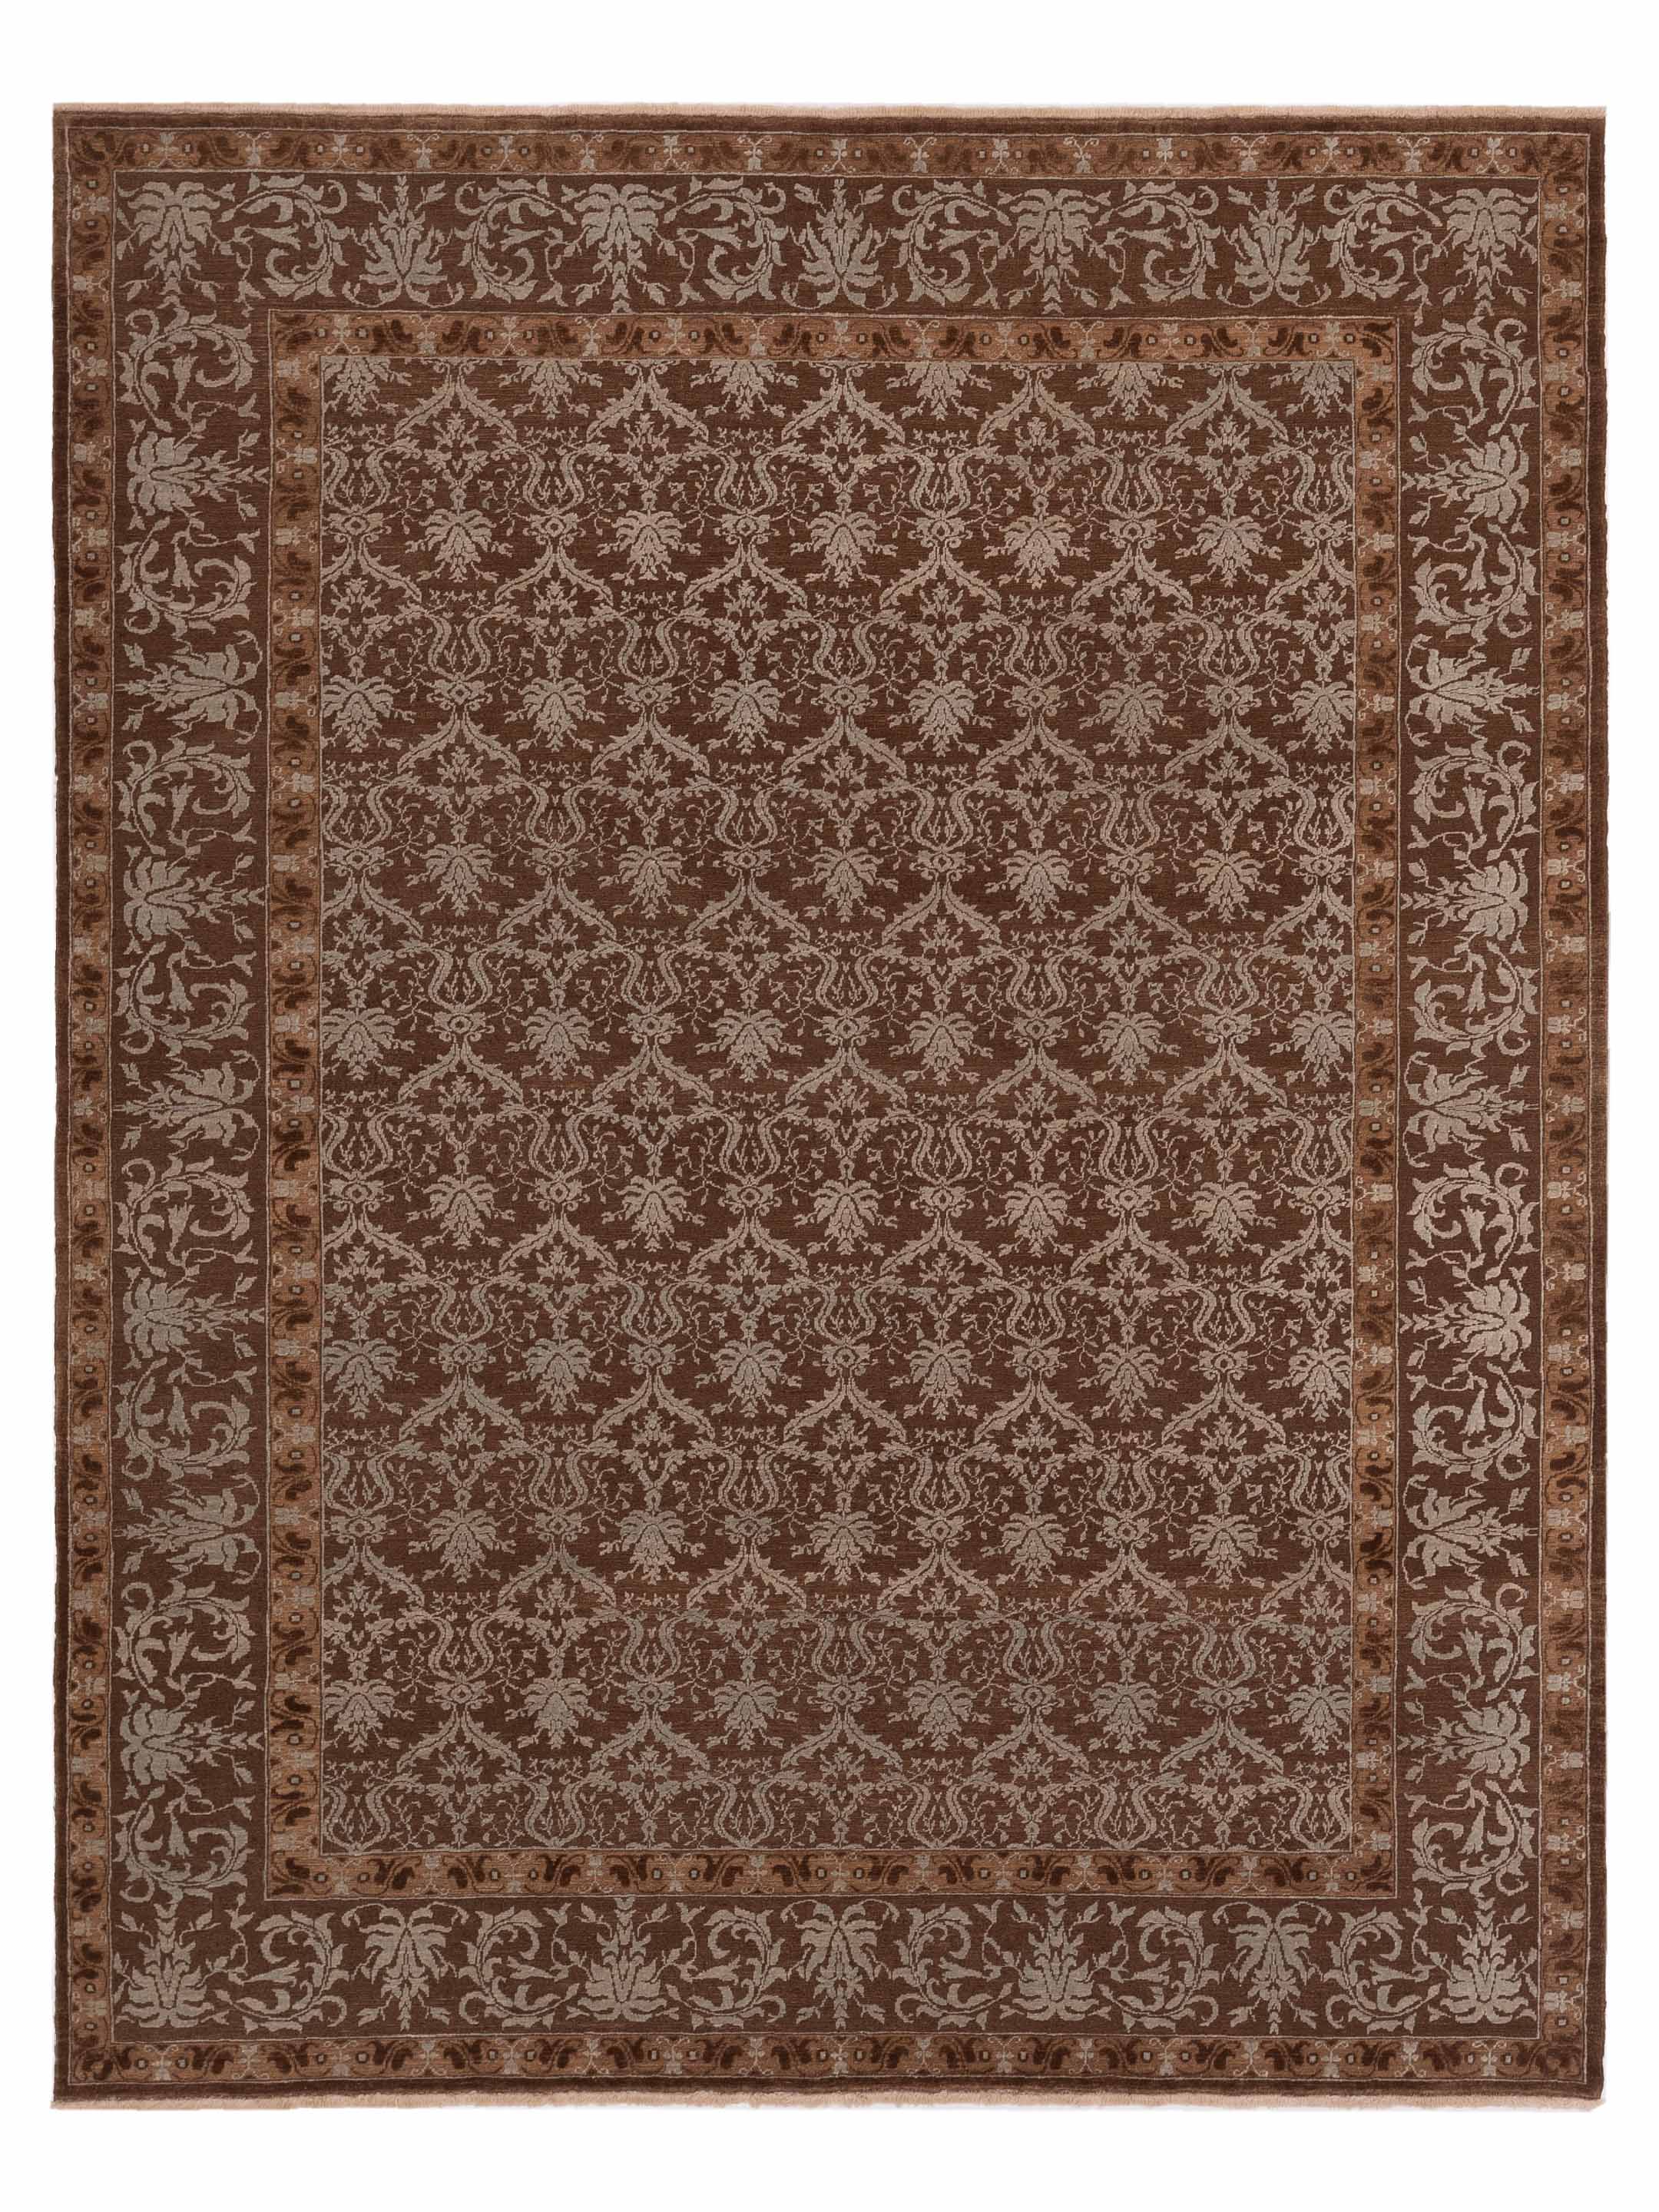 Transitional Brown 9x12 Area Rug	